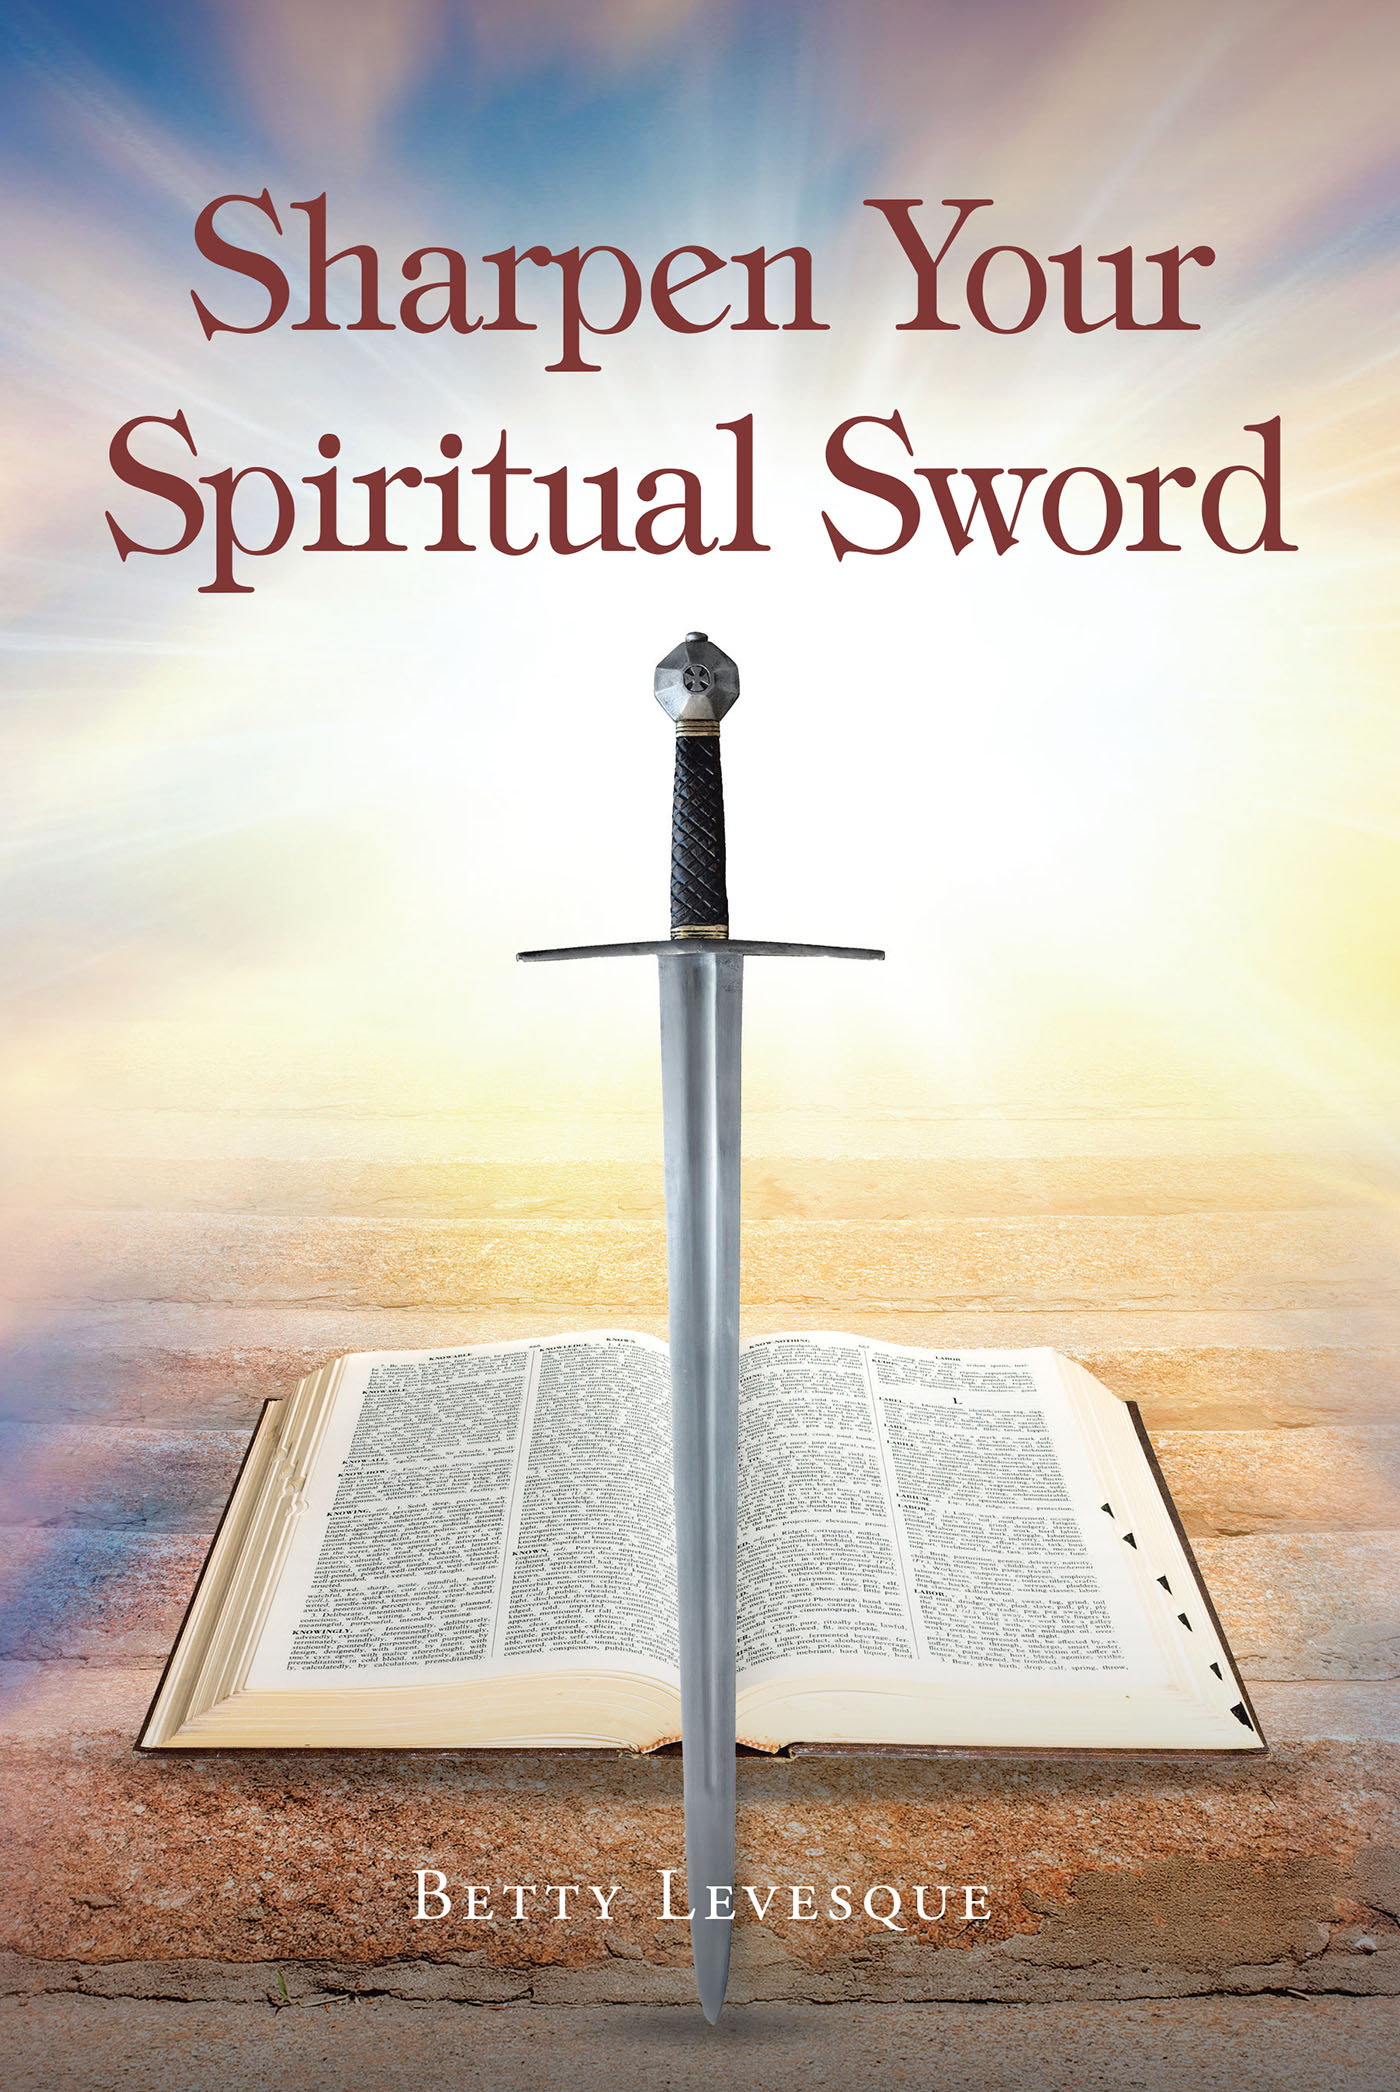 Betty Levesque’s Newly Released "Sharpen Your Spiritual Sword" is an Encouraging Resource for Daily Connection with God and Key Scripture